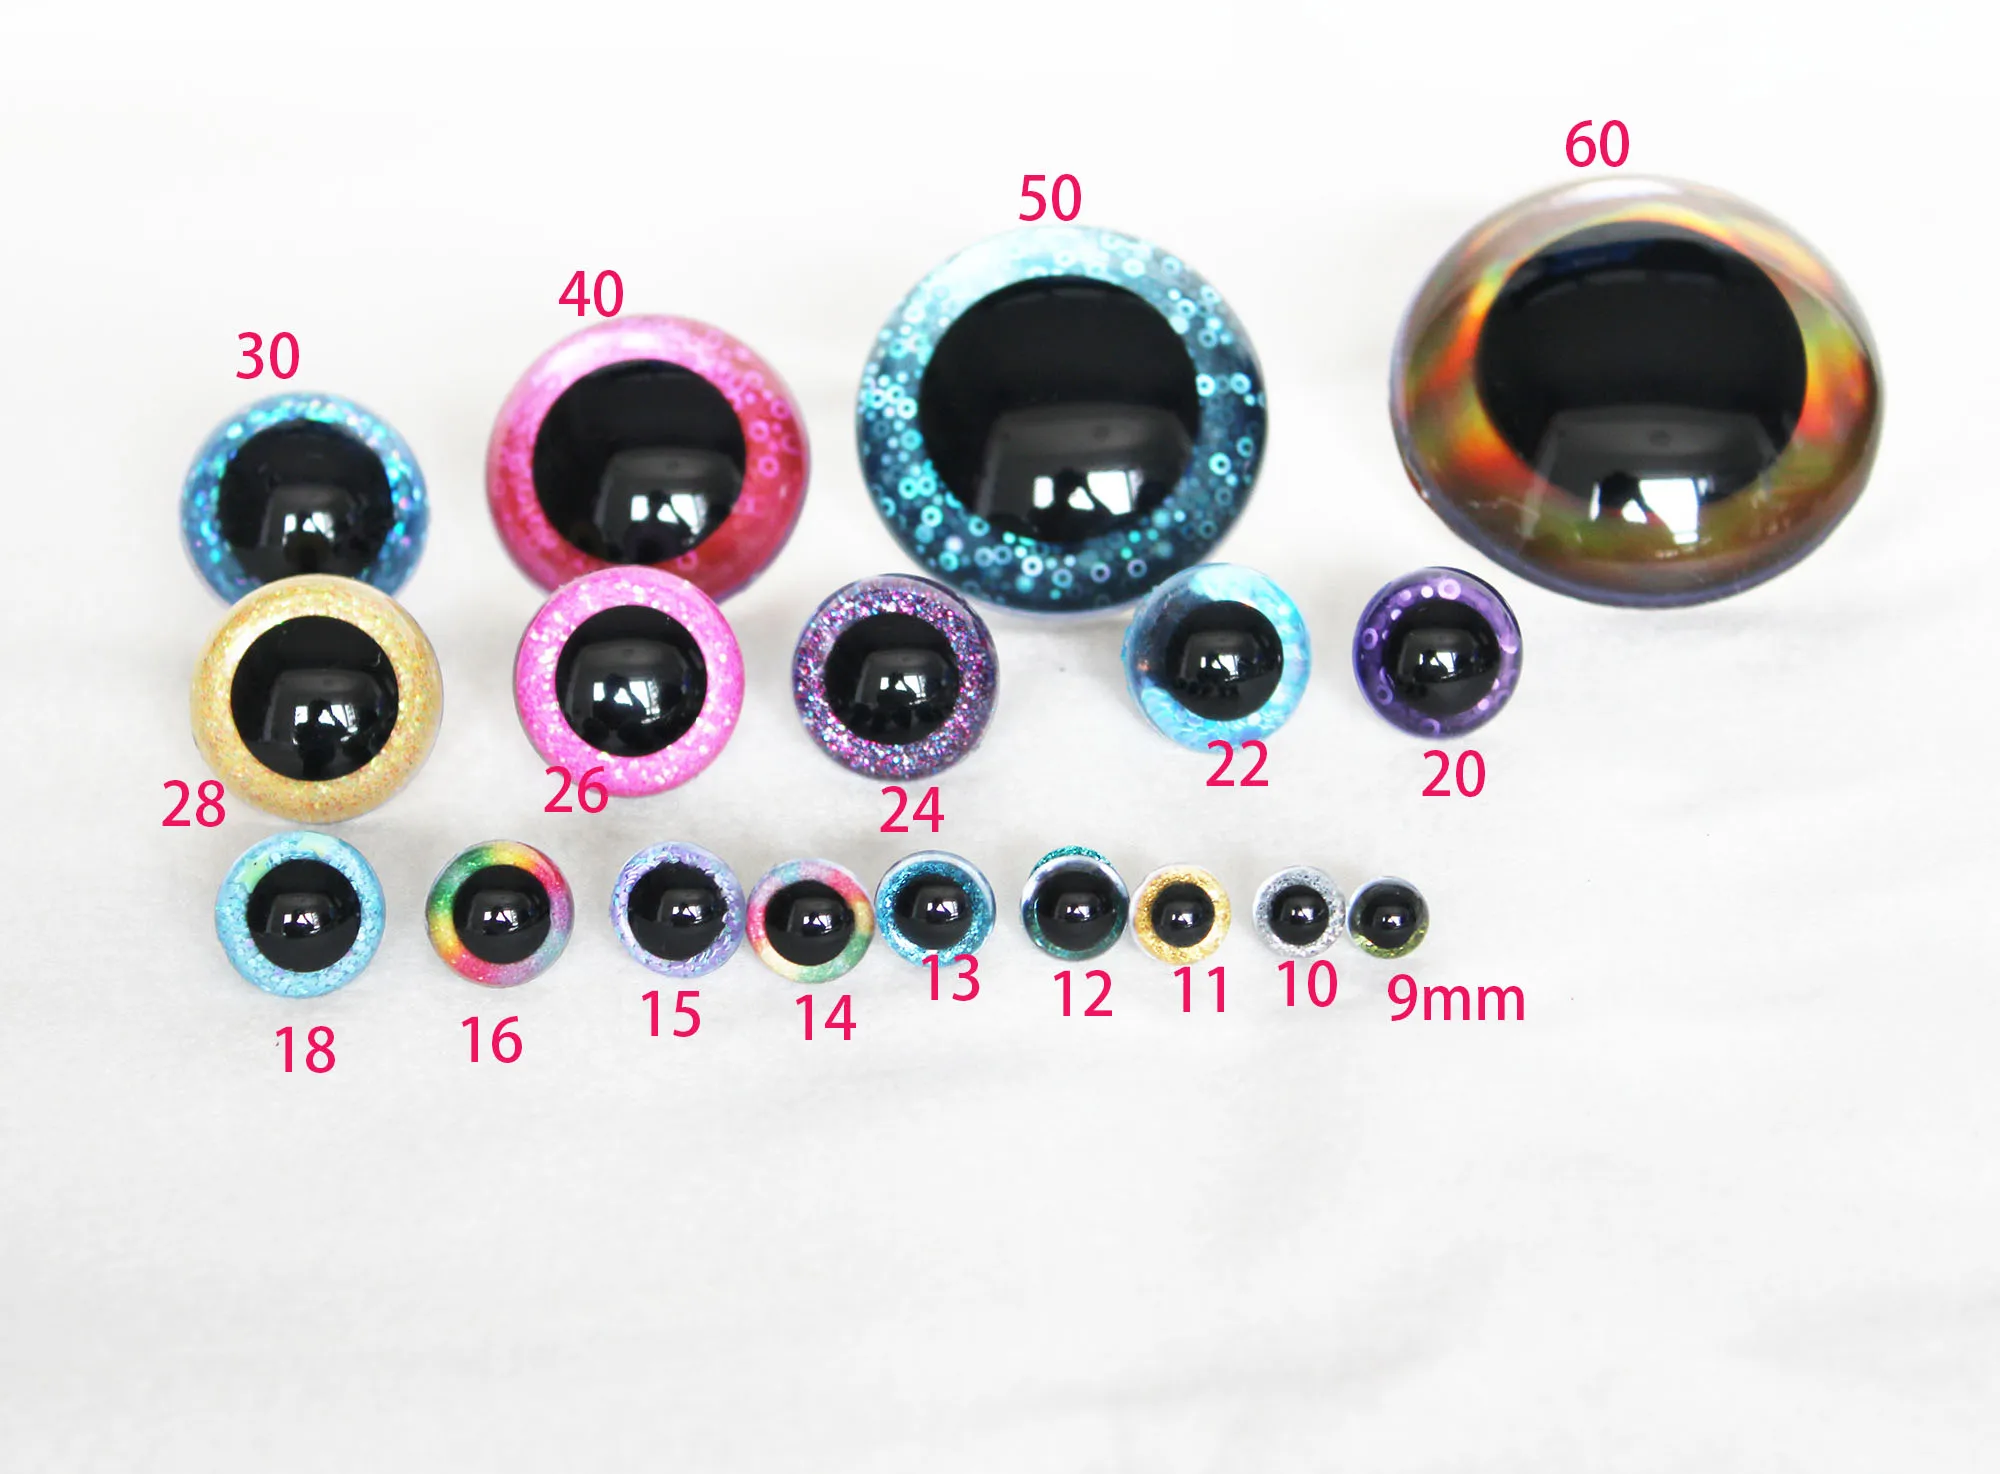 CLEAR Safety Eyes With Black Pupil, Available in 10 Different